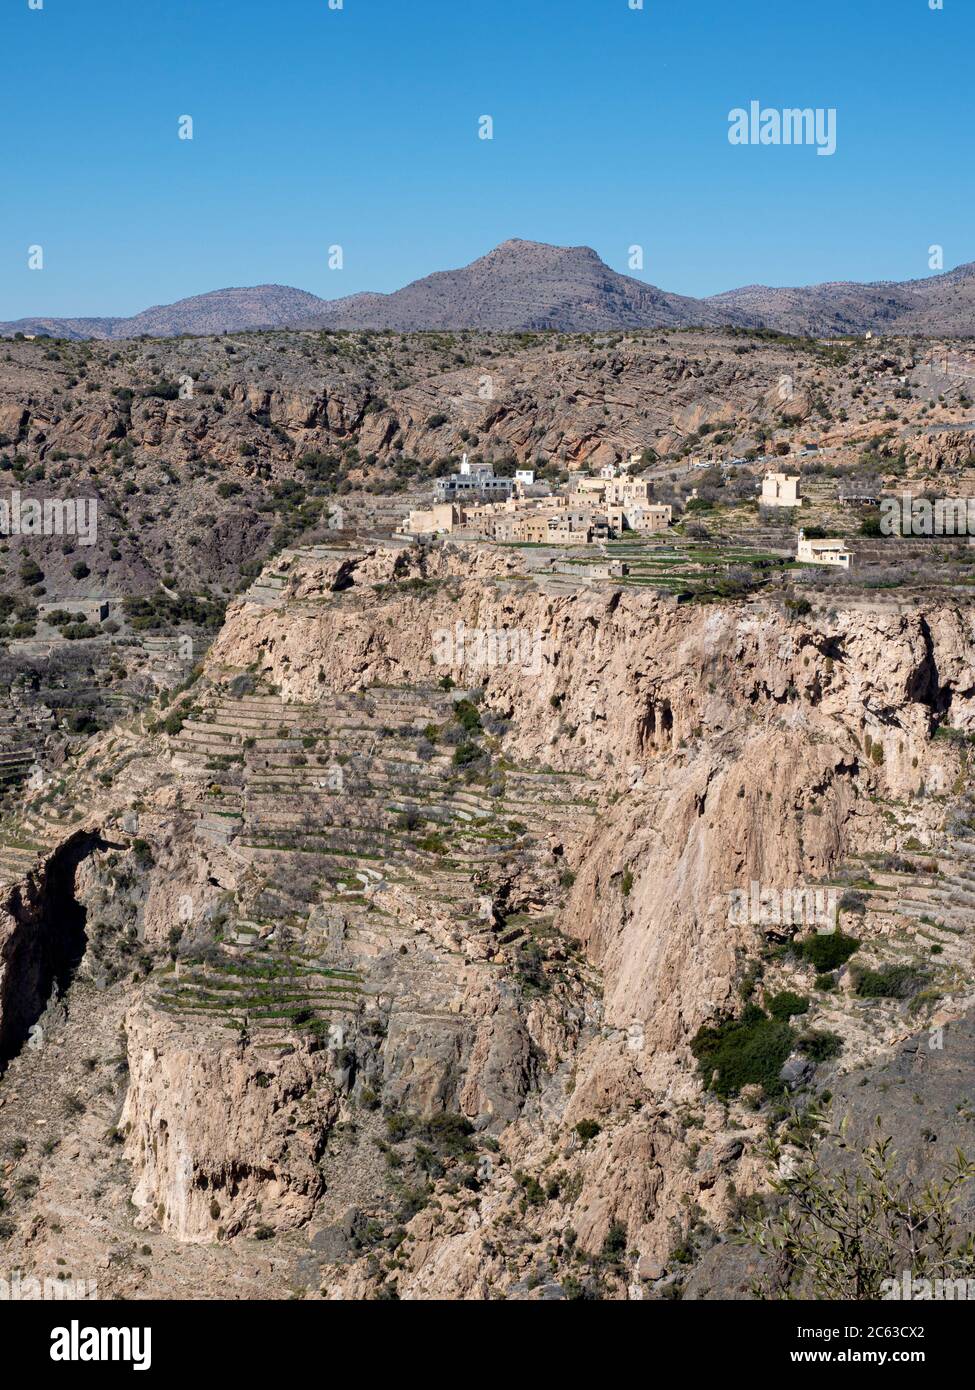 Terraced gardens line the cliffs near traditional villages of the Sayq Plateau, Sultanate of Oman. Stock Photo